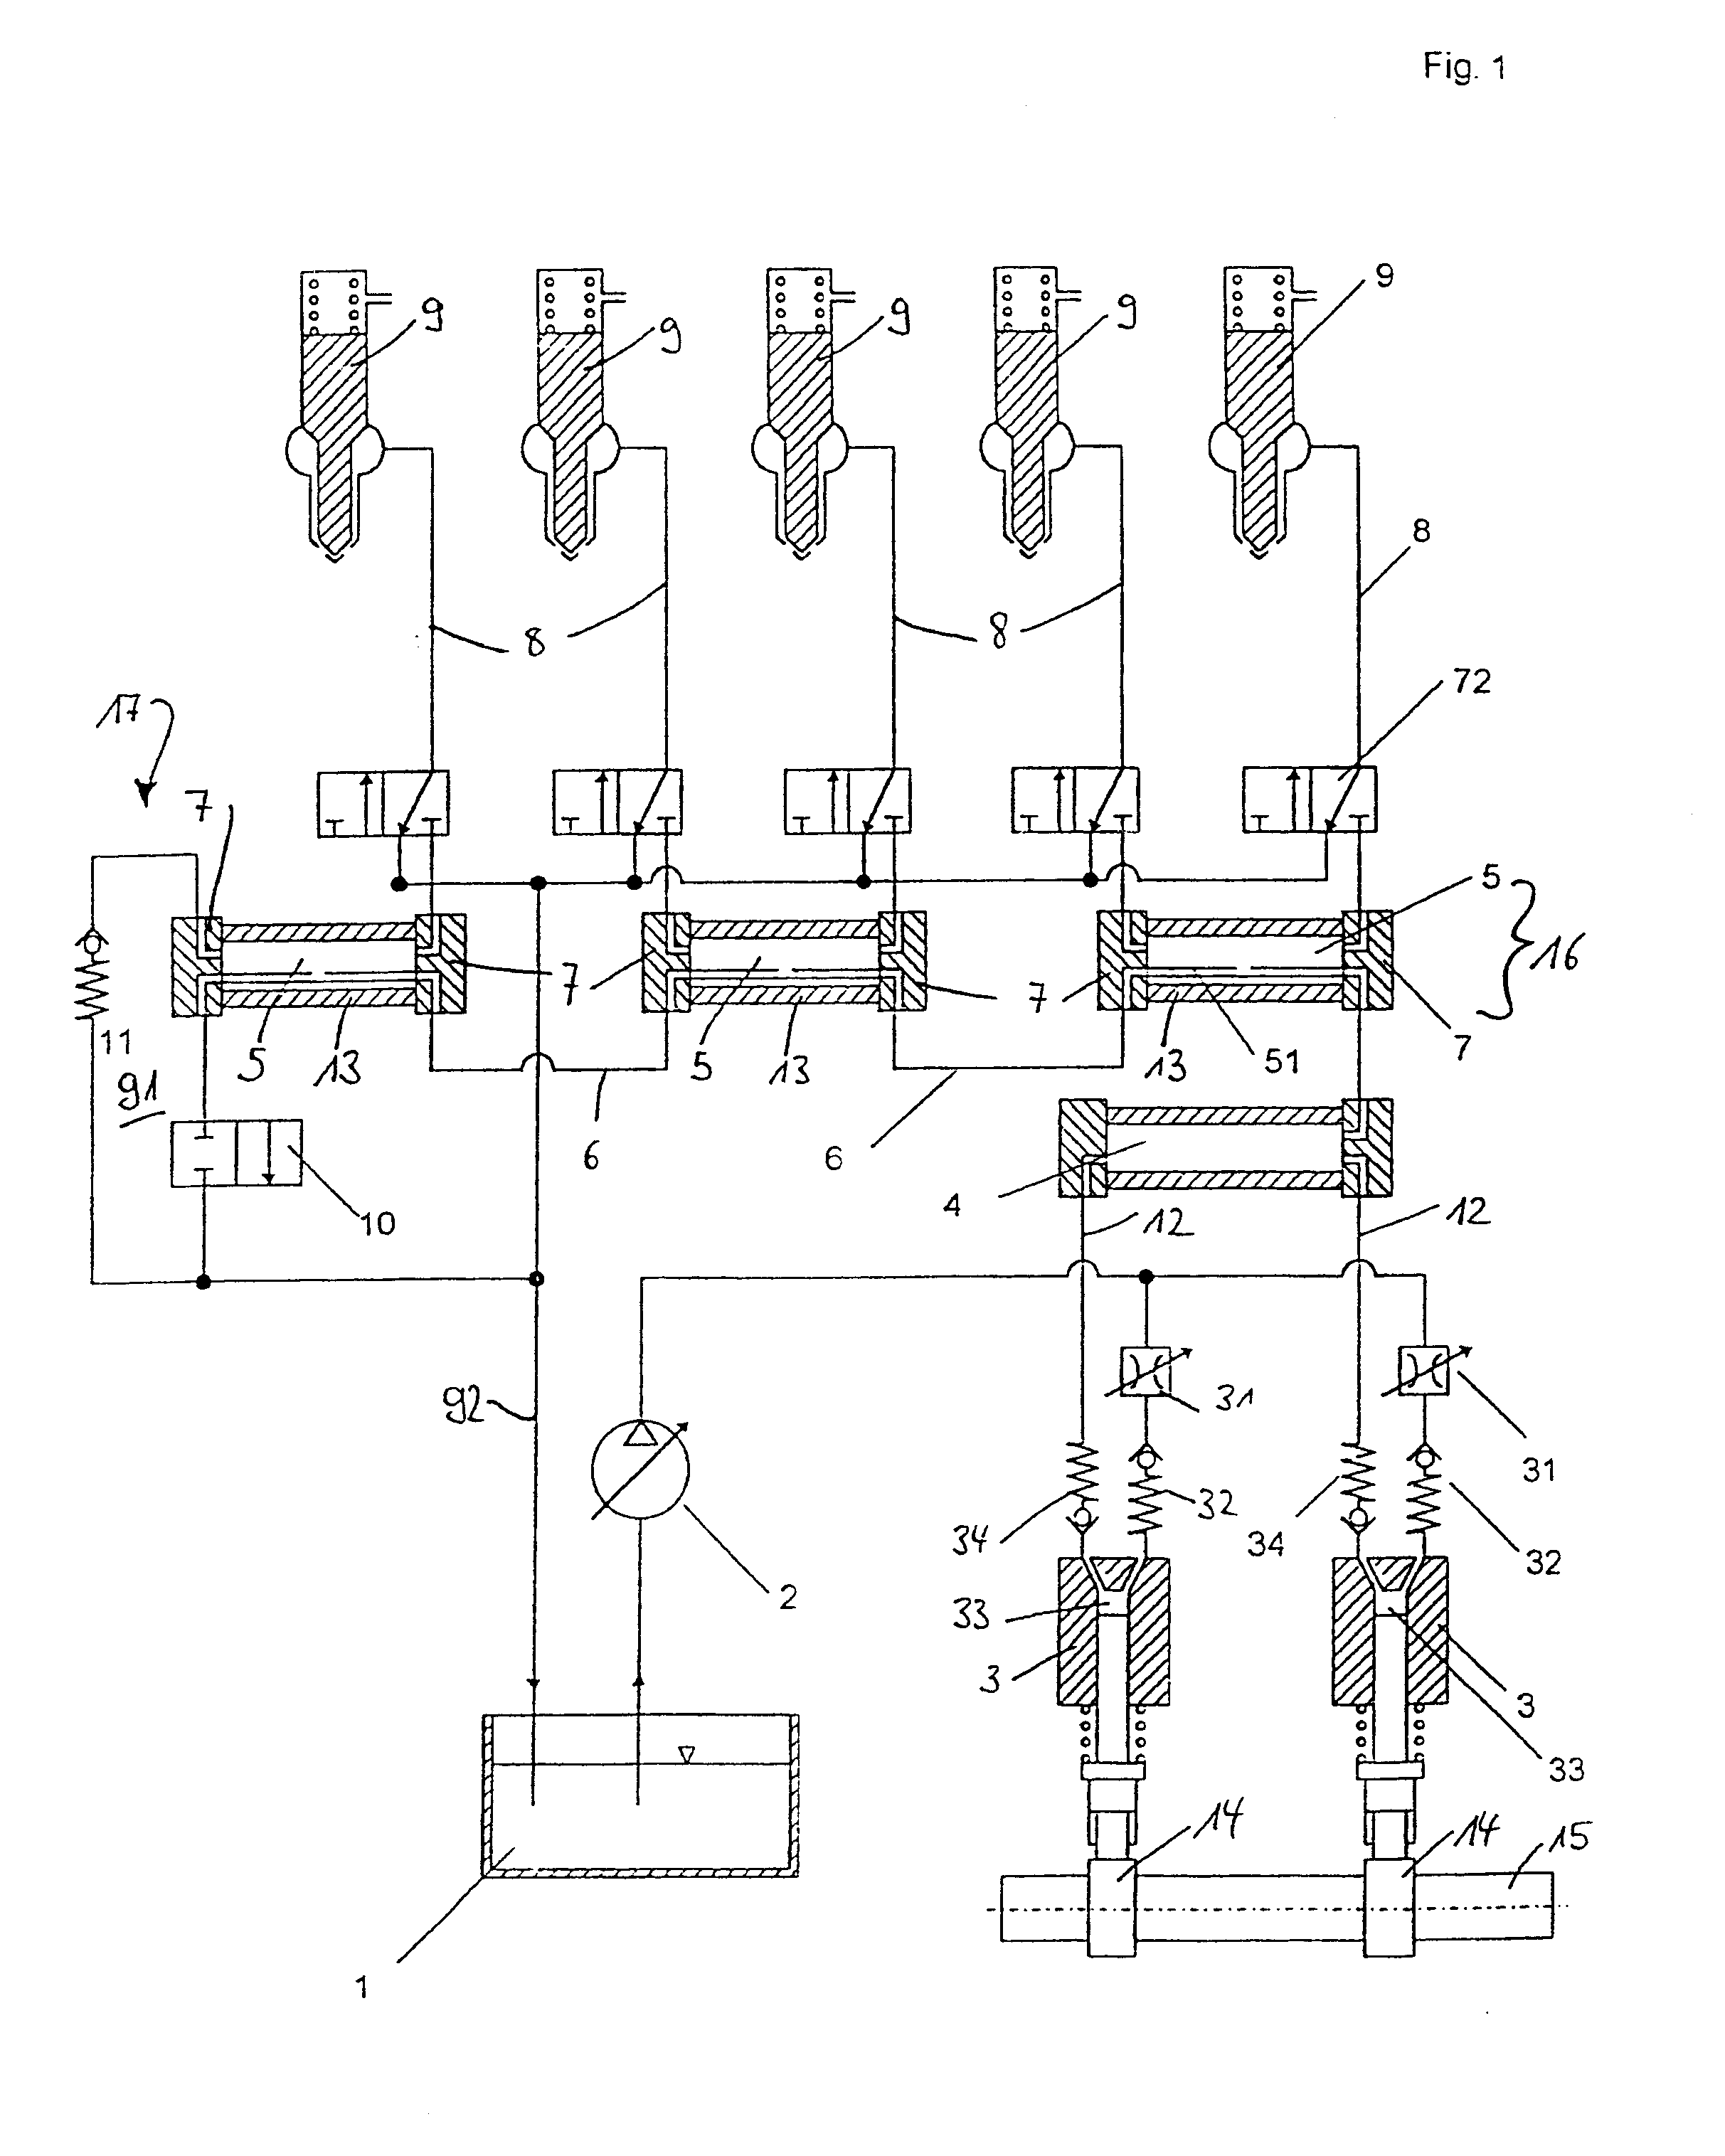 Fuel supply installation in the form of a common-rail system of an internal combustion engine having a plurality of cylinders